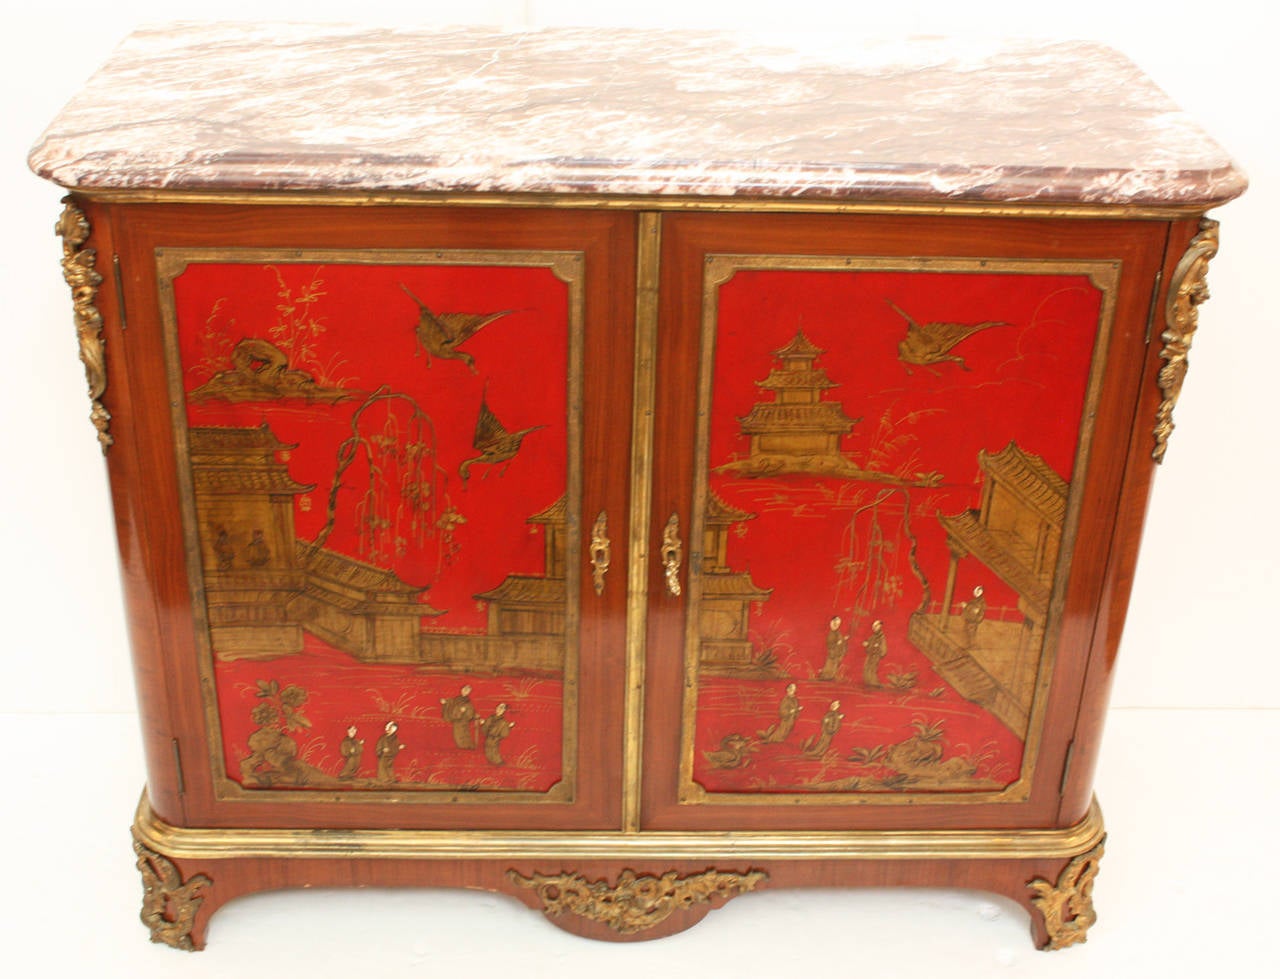 Louis XV Cabinet with Red Lacquer and Chinoiserie Decoration by Manheim